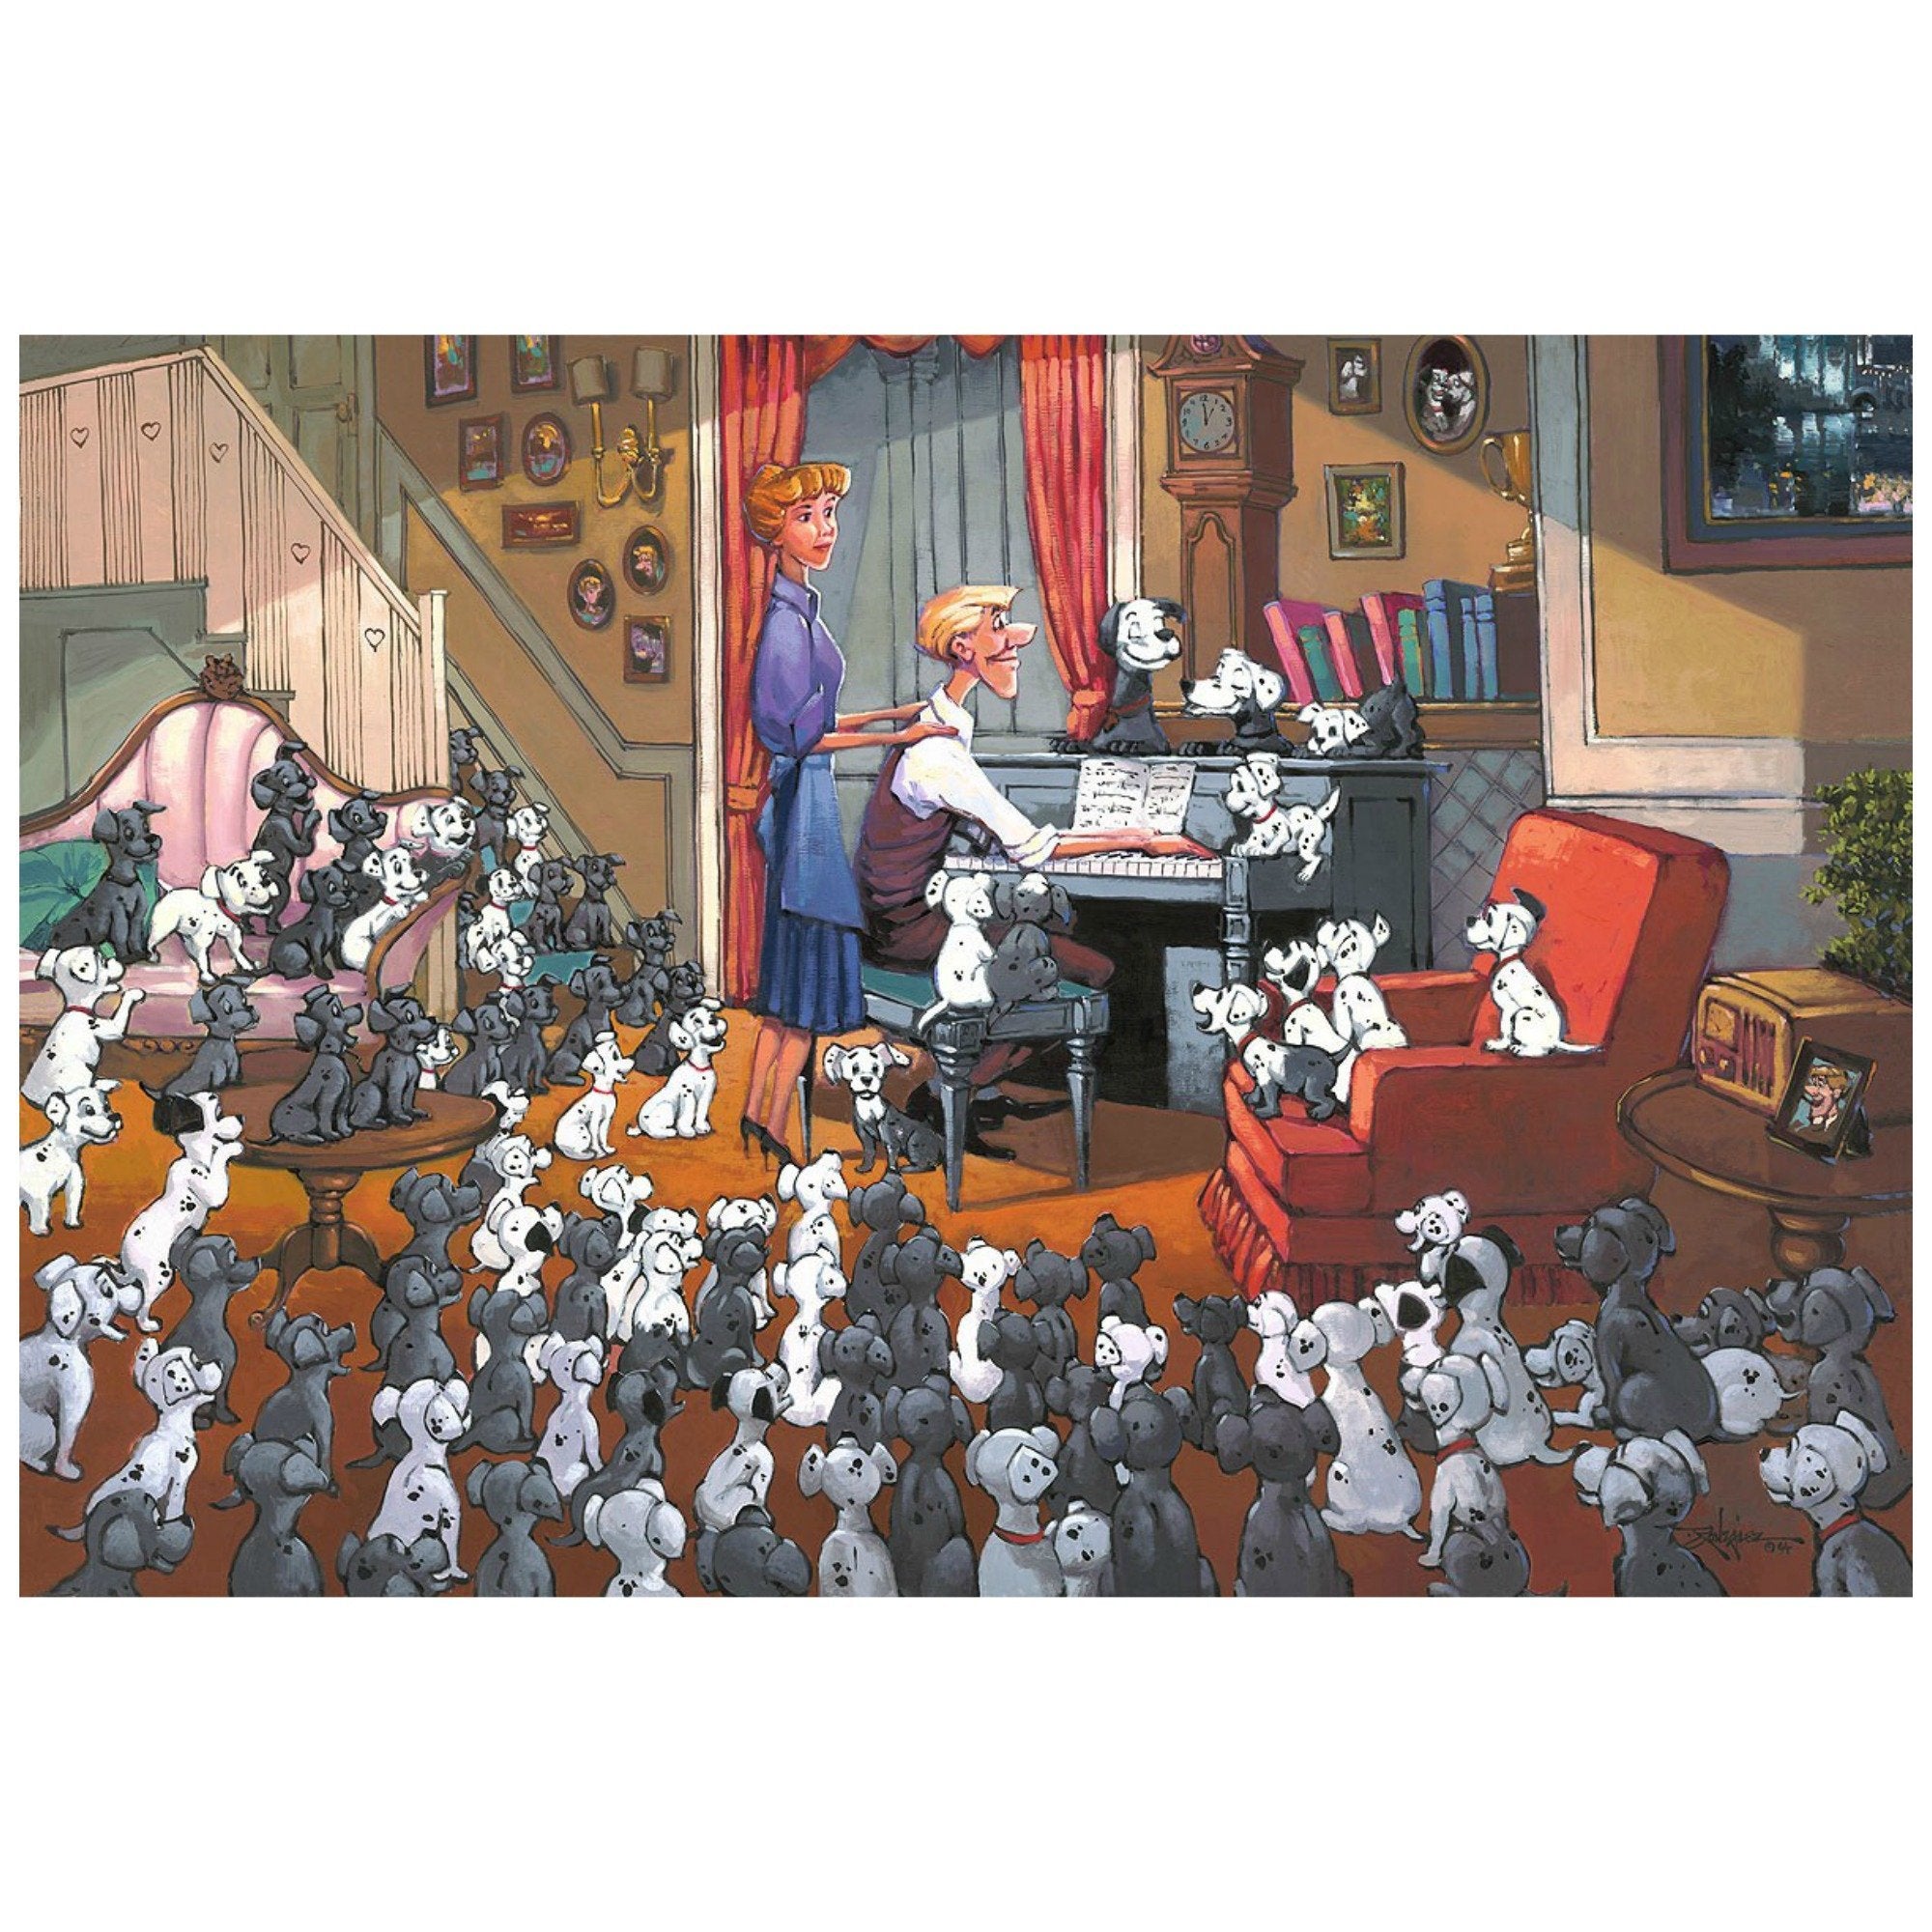  Family Gathering by Rodel Gonzalez.  Perdy and Pongo and their pups gathered quietly around Roger as he plays the piano, with Anita showing support. 